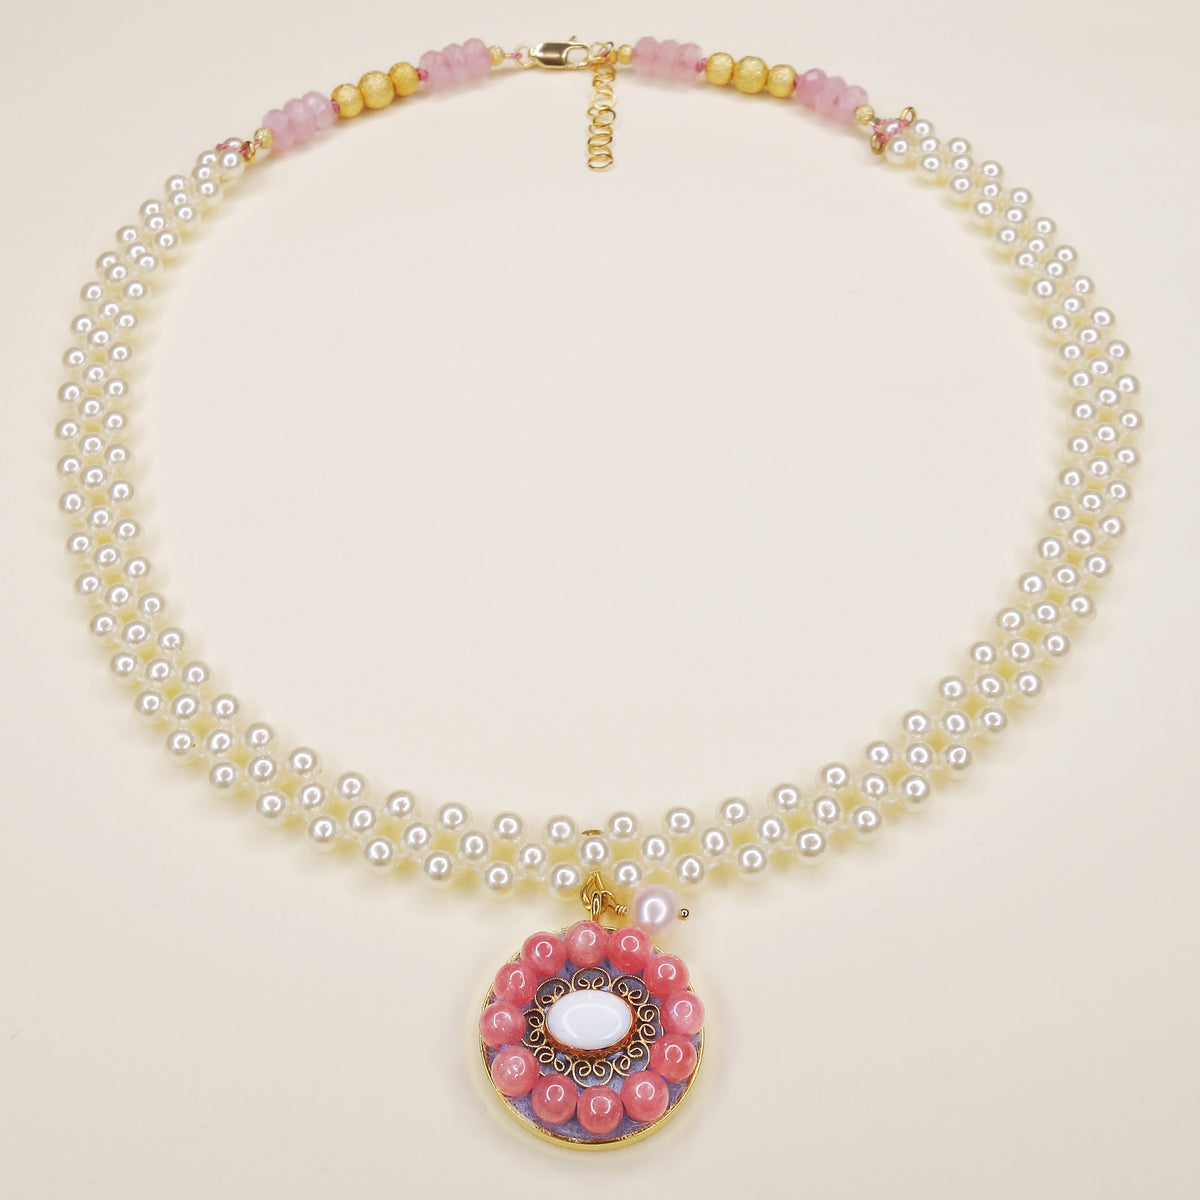 An Angel's Kiss: rainbow opal, pearl, and rhodochrosite mosaic necklace